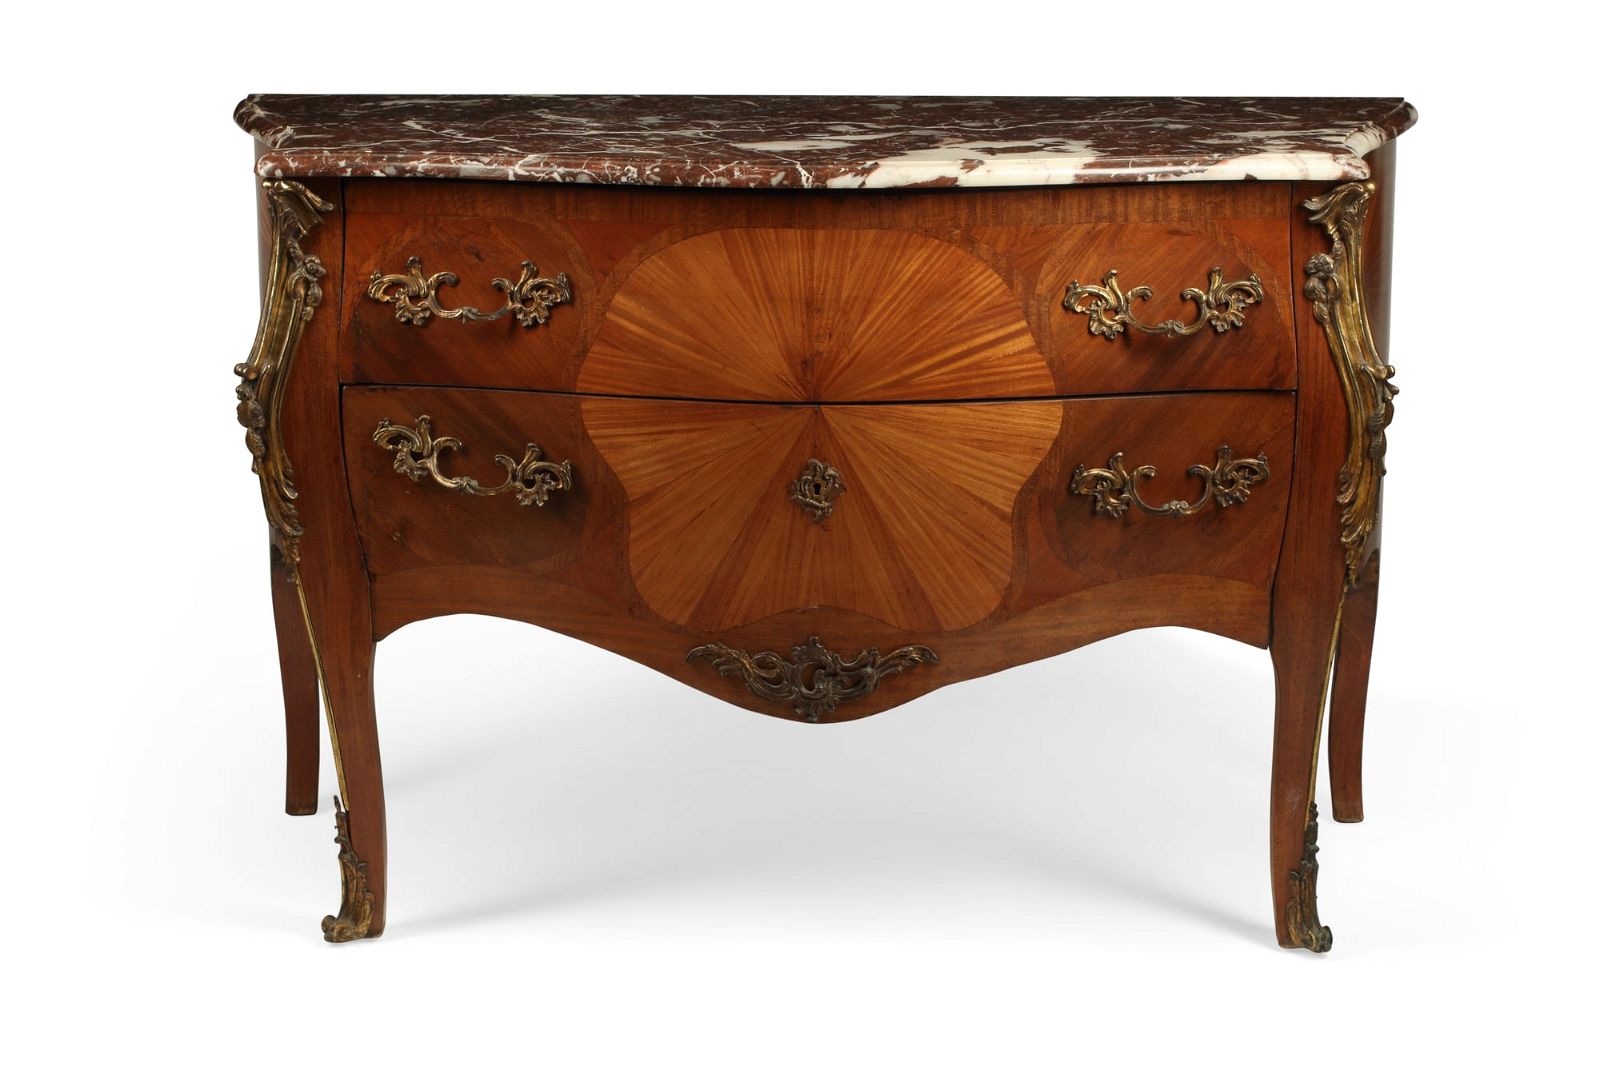 A LOUIS XV STYLE SATINWOOD AND